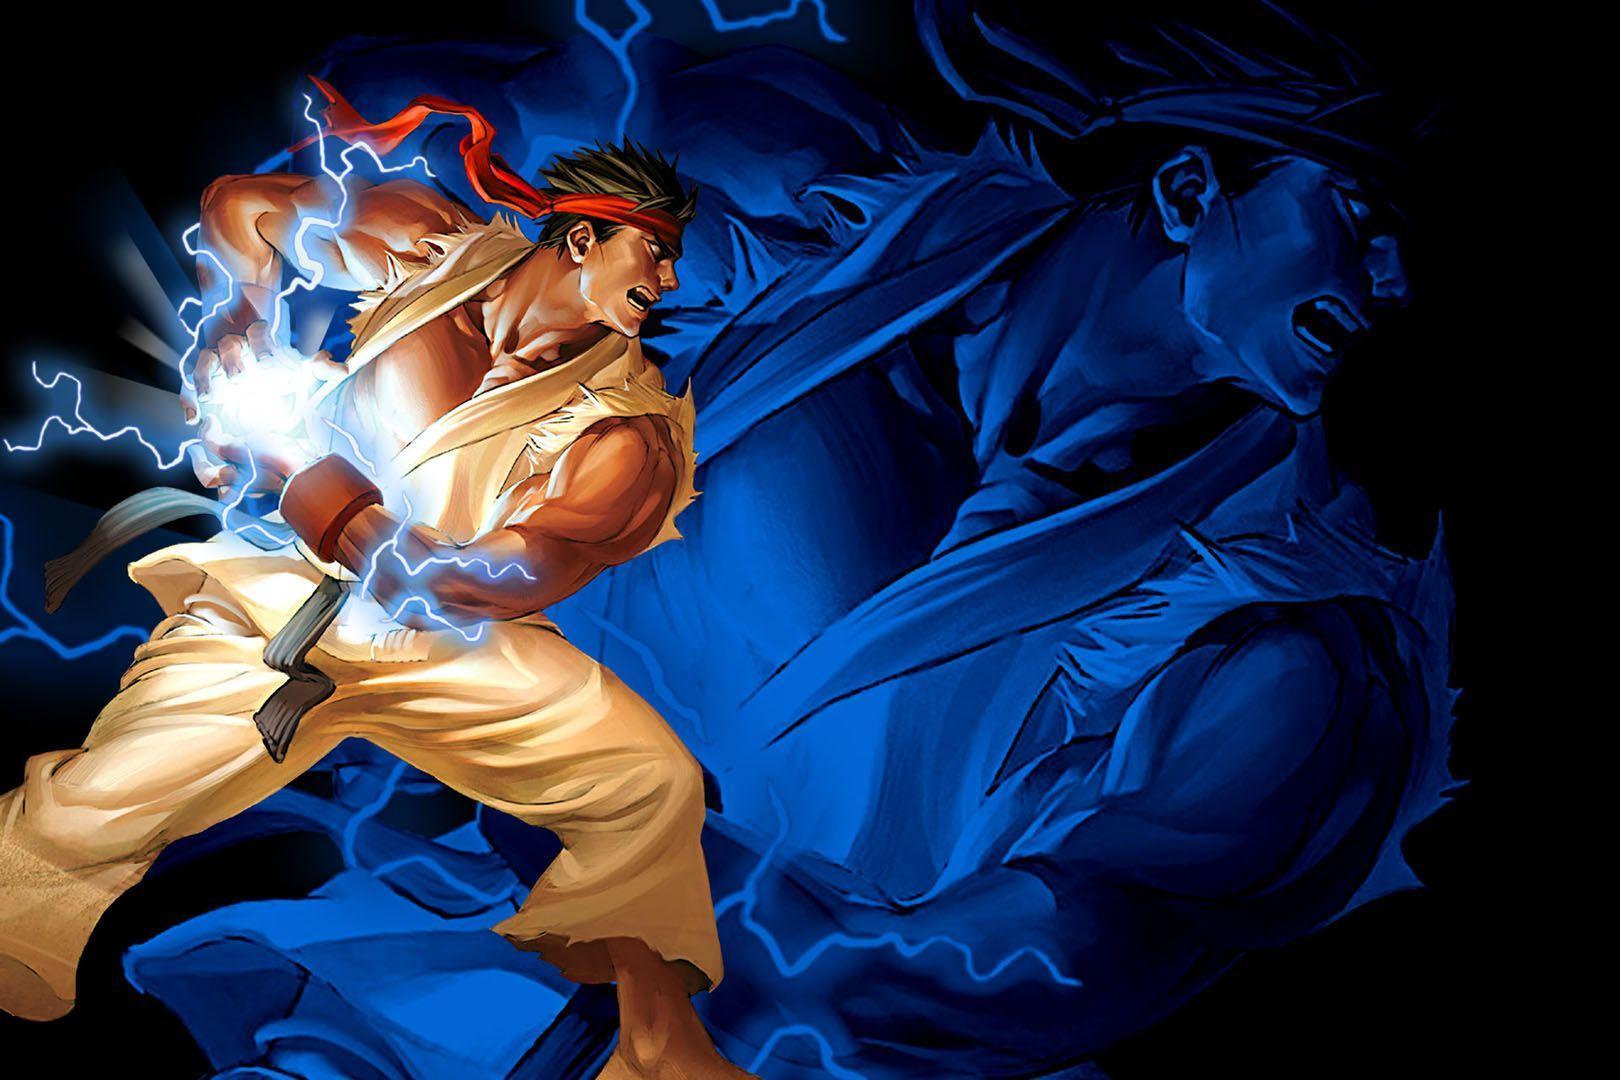 Street Fighter II Video Game HD Wallpaper. HD Wallapers for Free